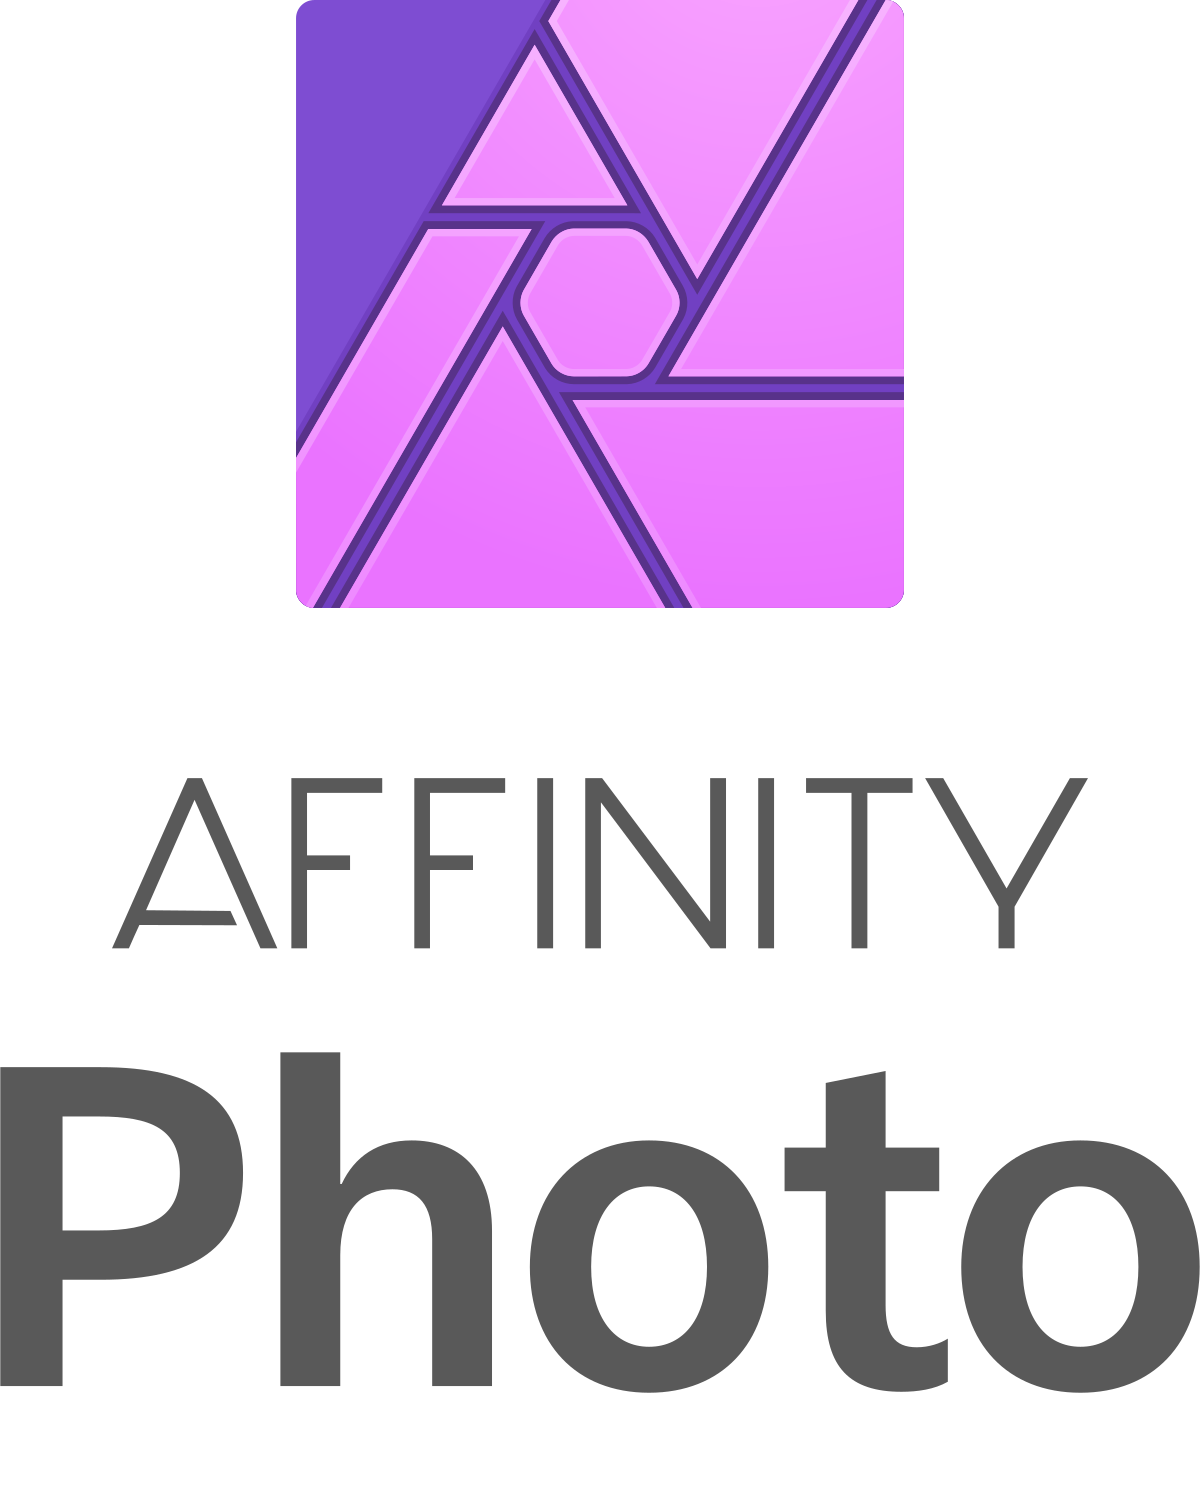 Affinity Photo’s Rise in Image Editing